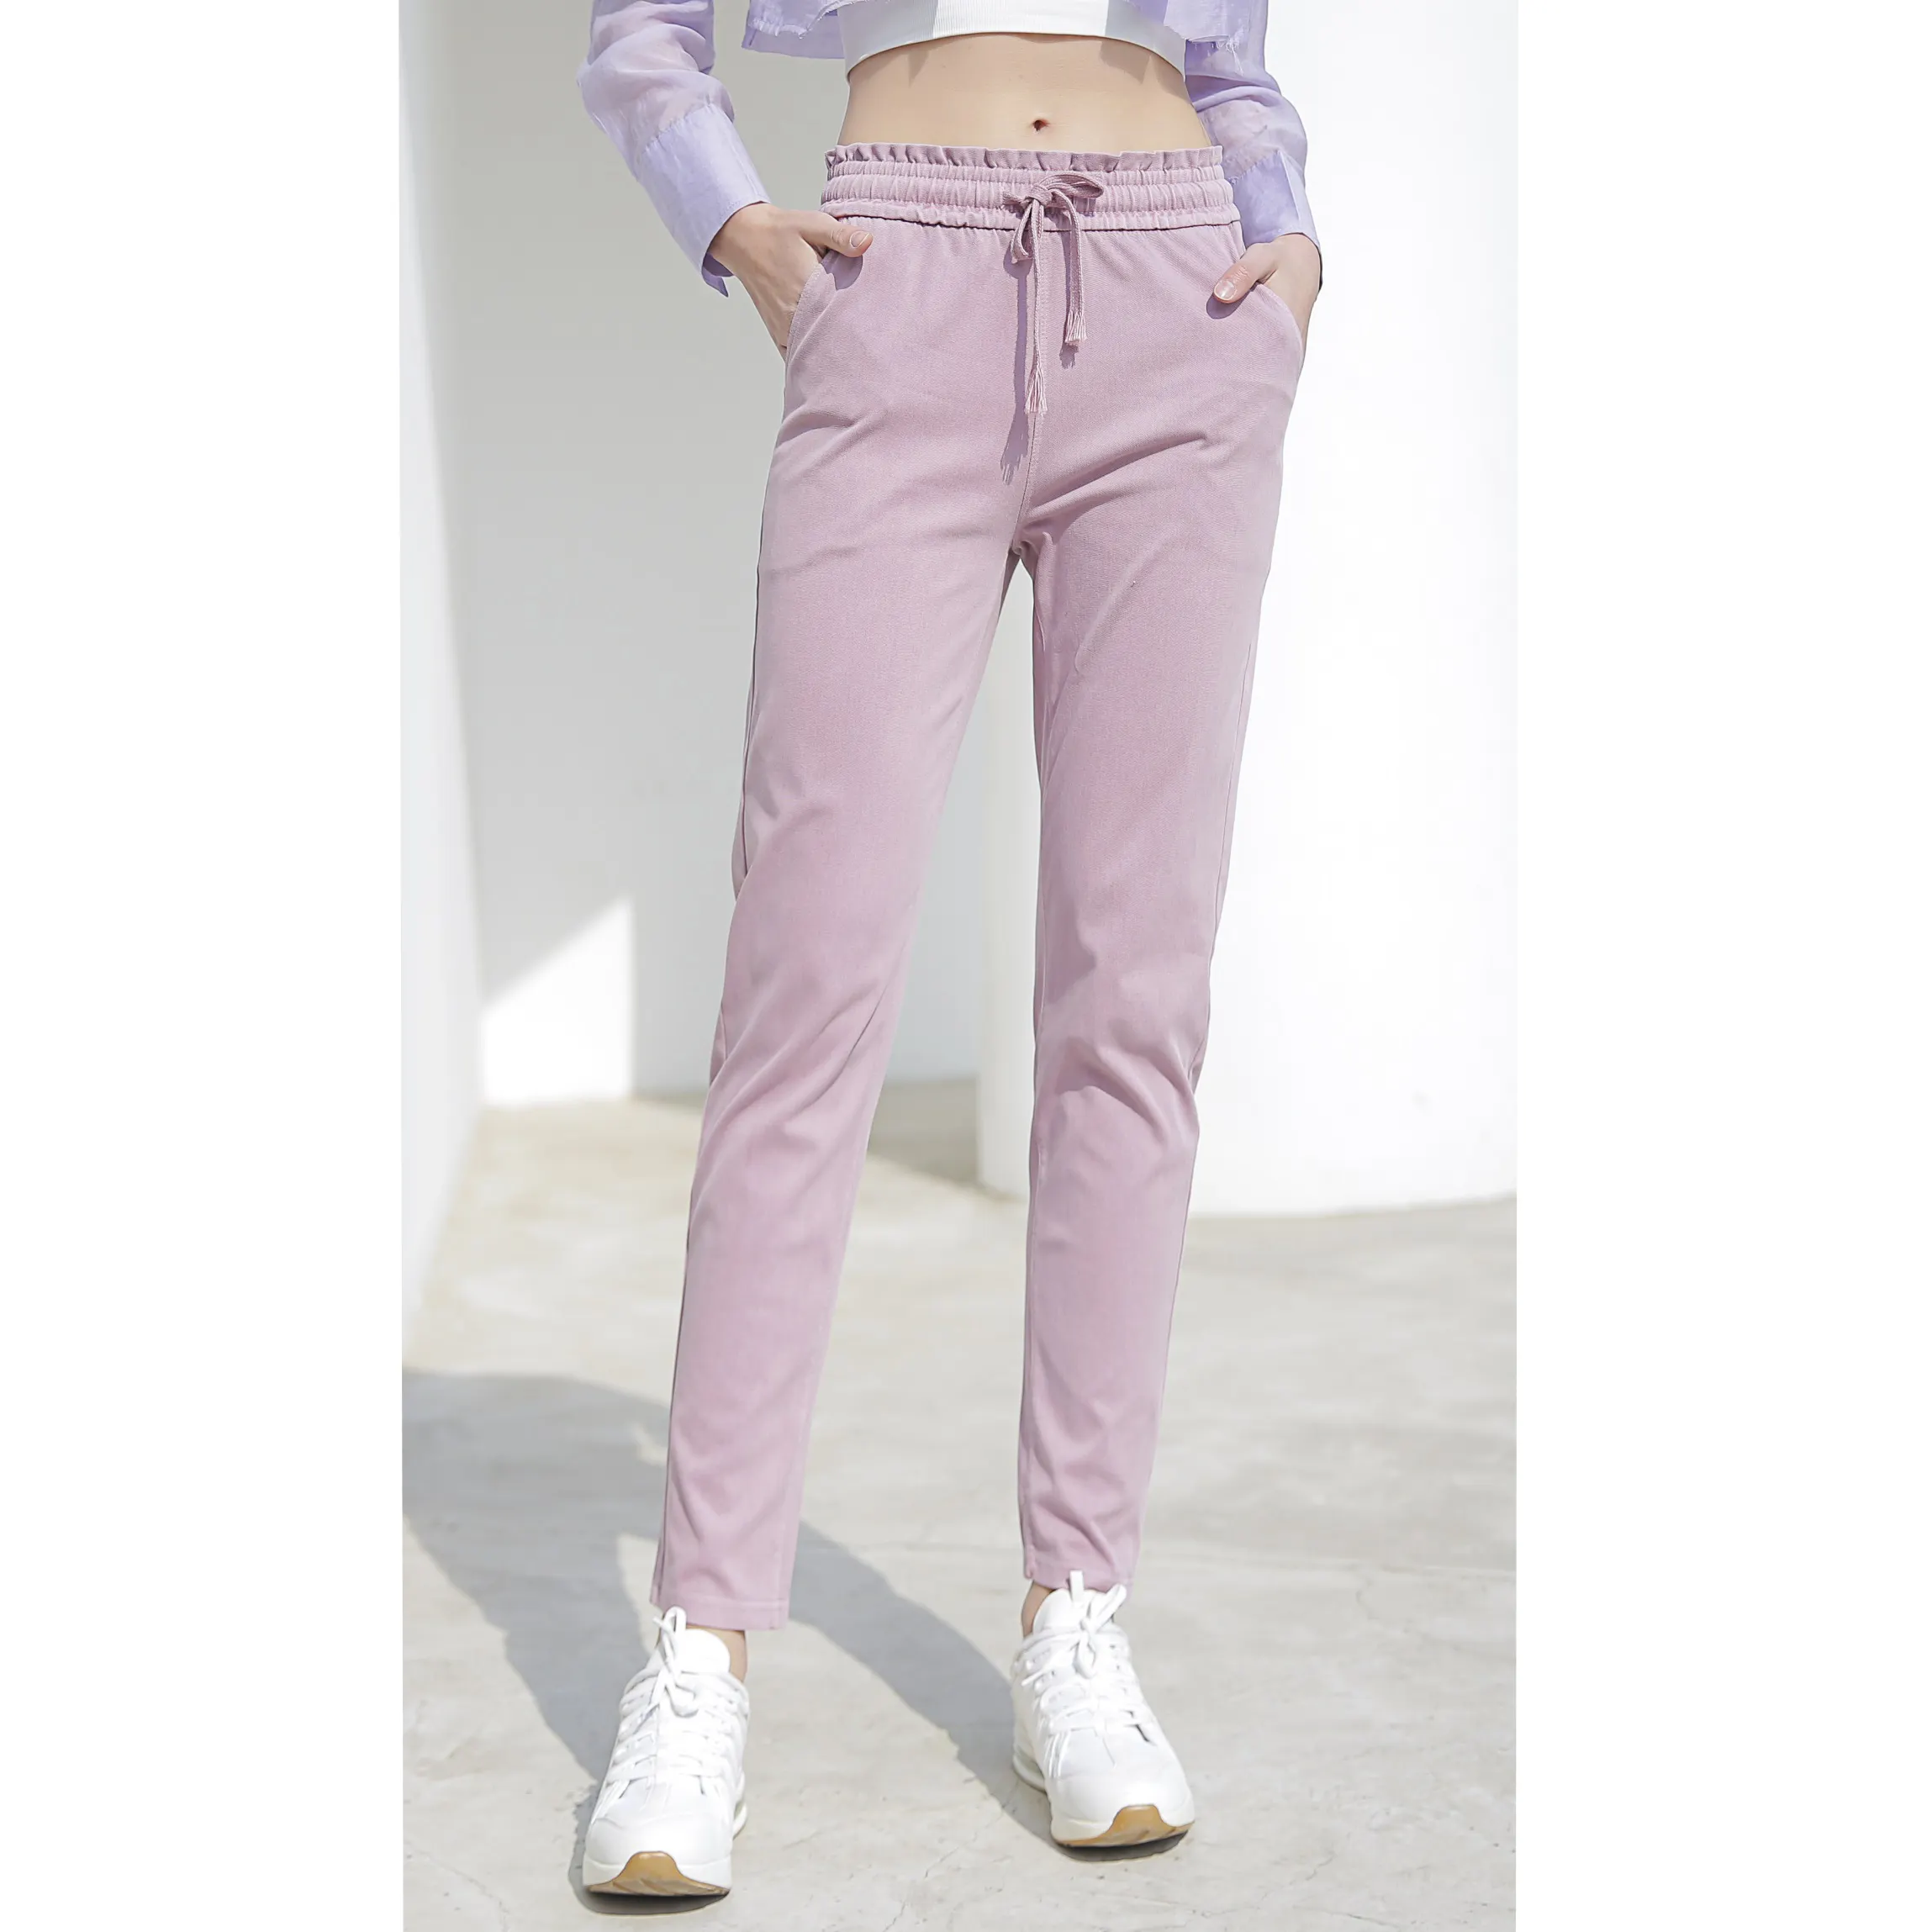 Comfortable breathable casual pants Harem women's pants straight all-match high waist trousers women's large size